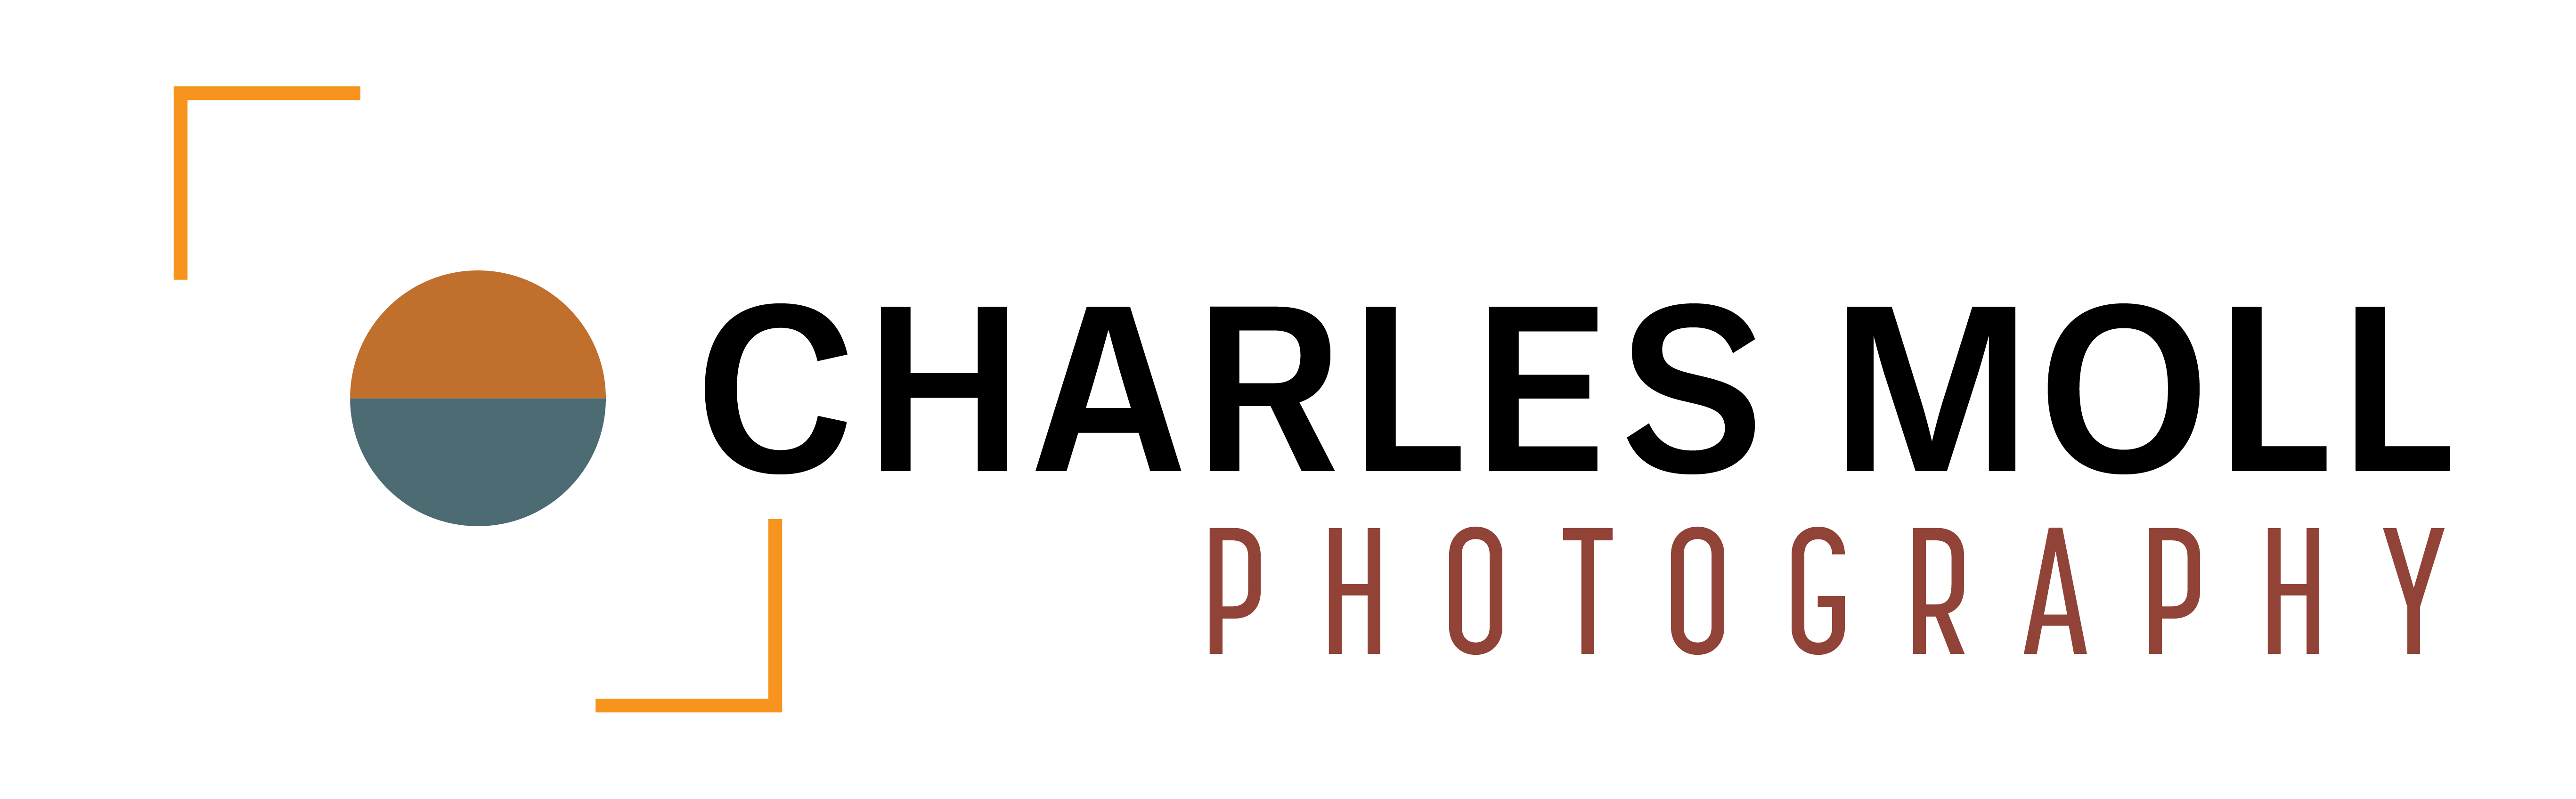 Business logo of Charles Moll Photography